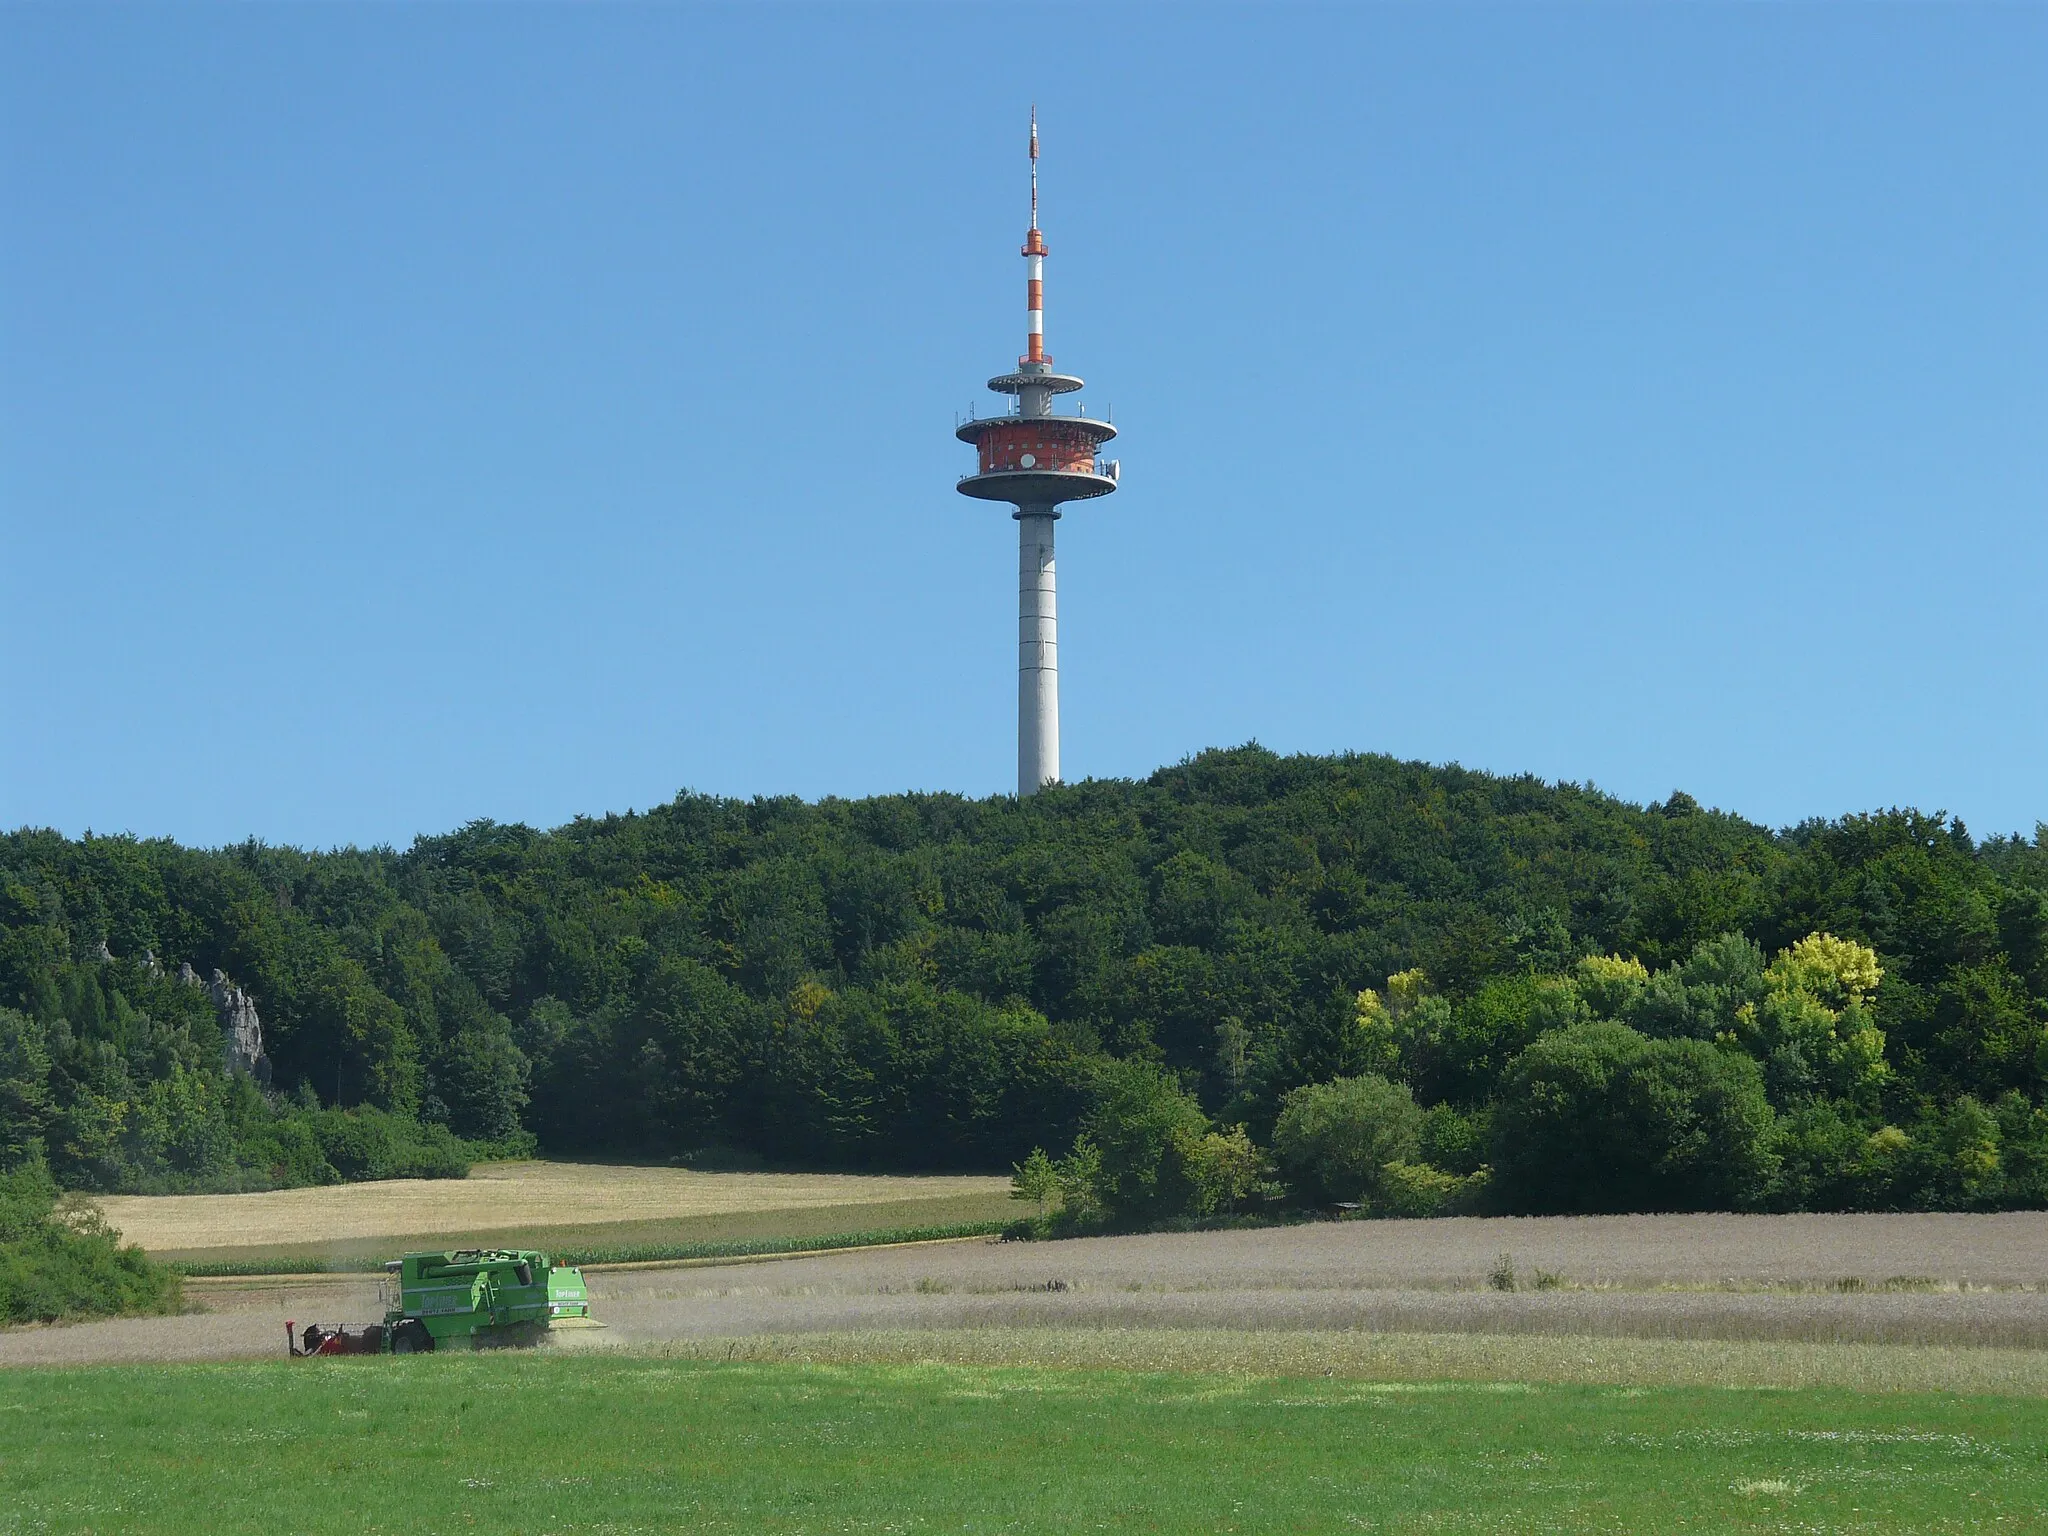 Photo showing: The telecommunication tower of Riegelstein, located five kilometers south of the town of Betzenstein.